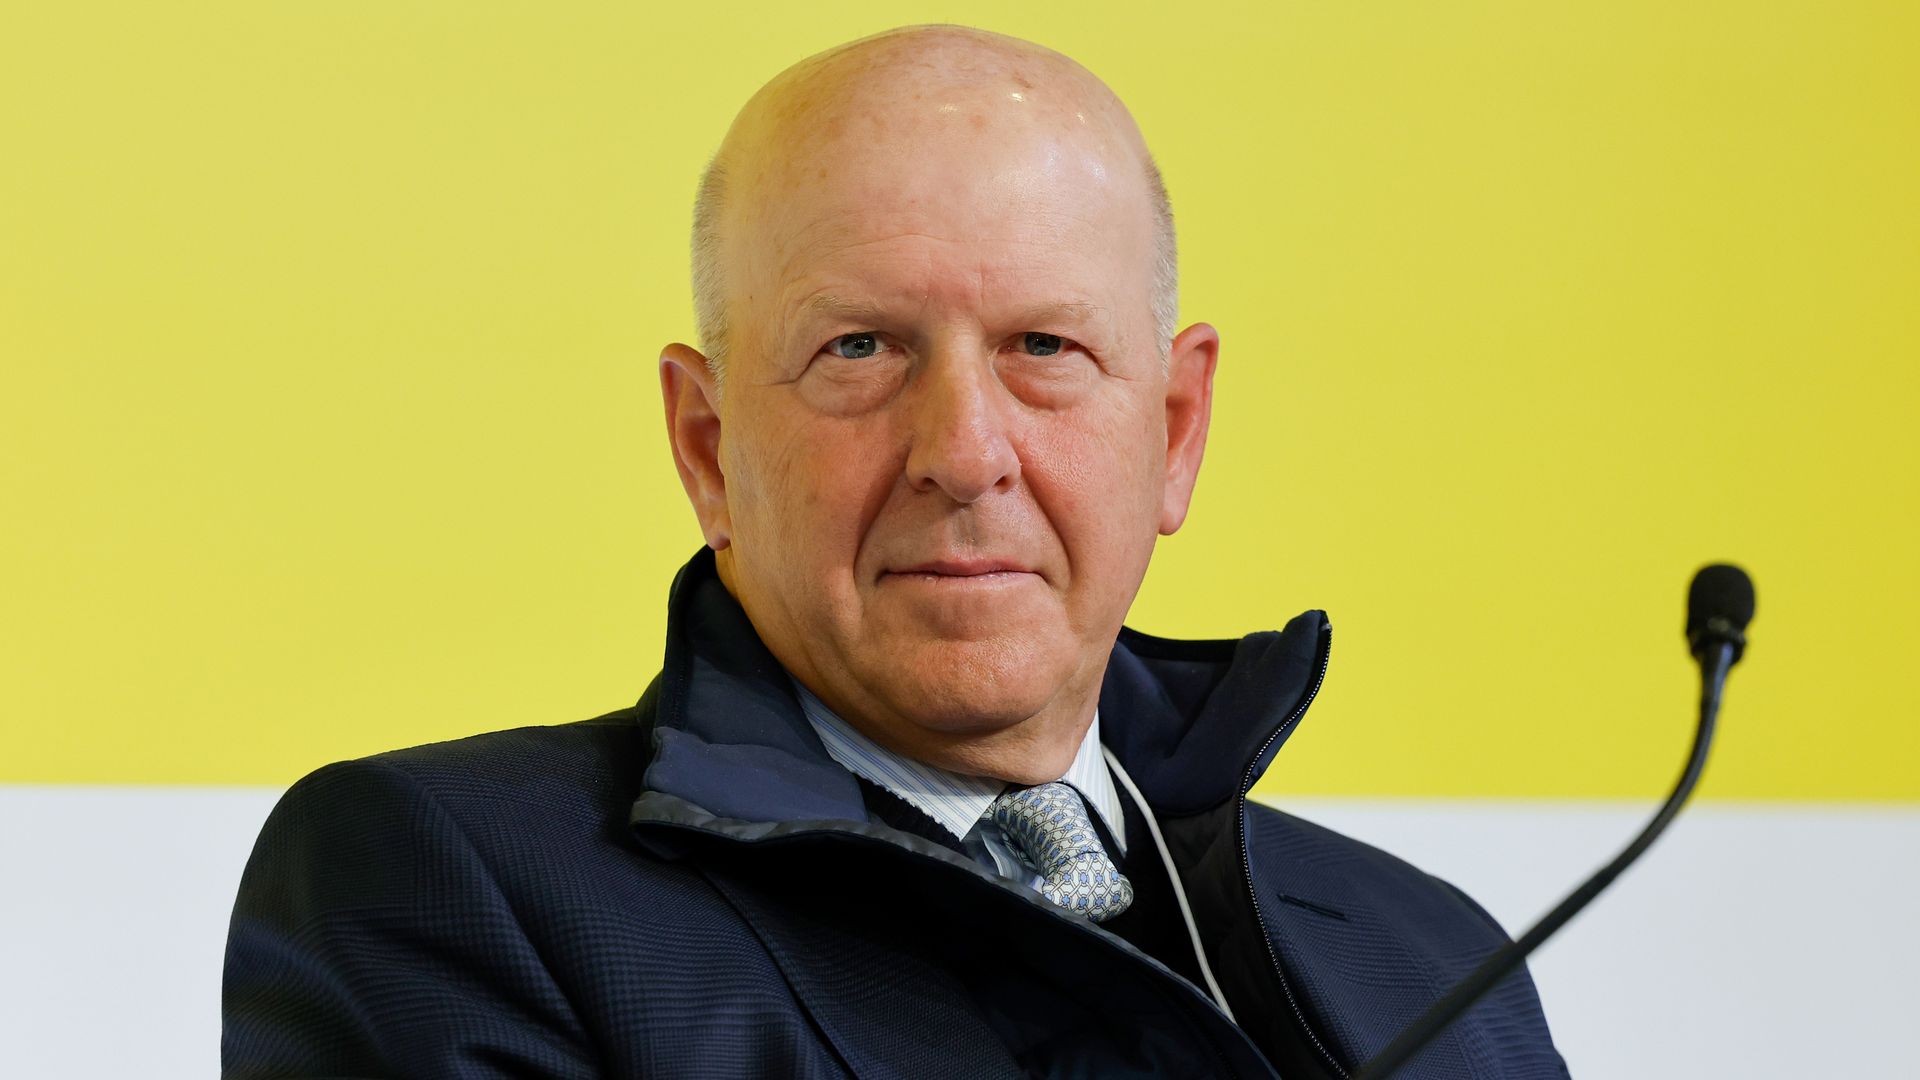 bald man wearing a jacket over a suit and tie with a yellow and white background behind him